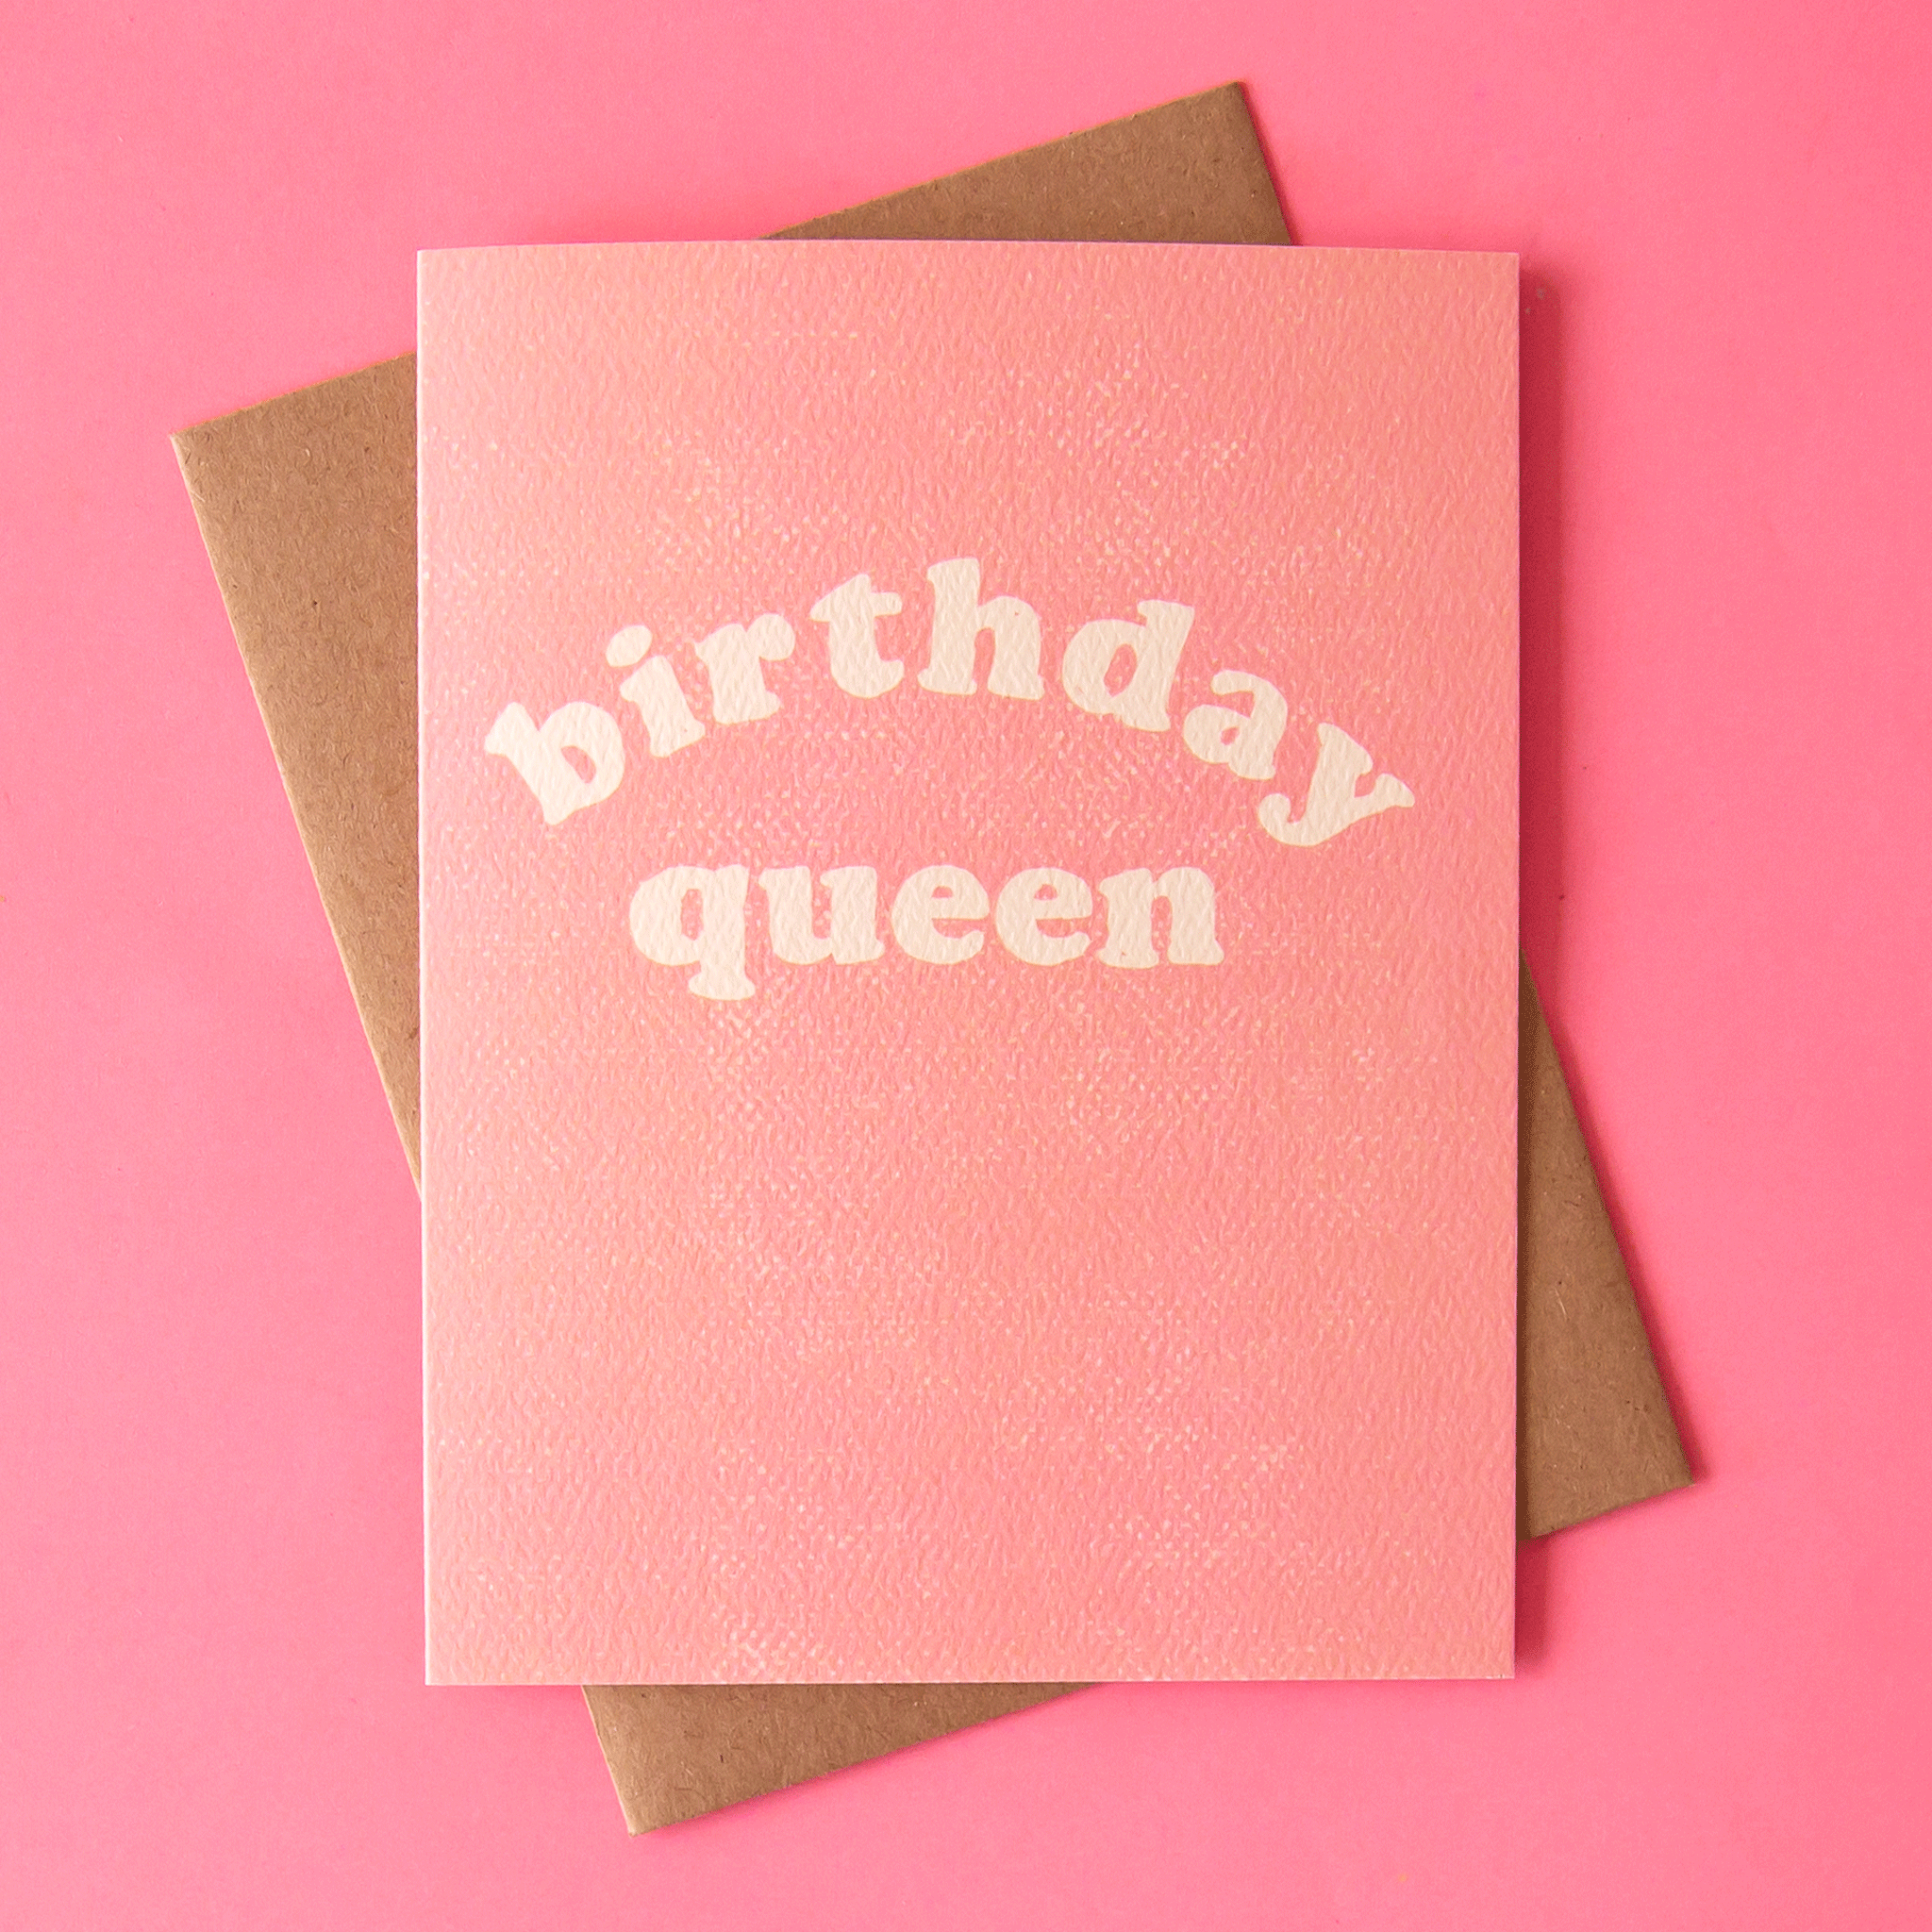 On a pink background is a pink birthday card with a Kraft brown envelope that says, "birthday queen" in white text.